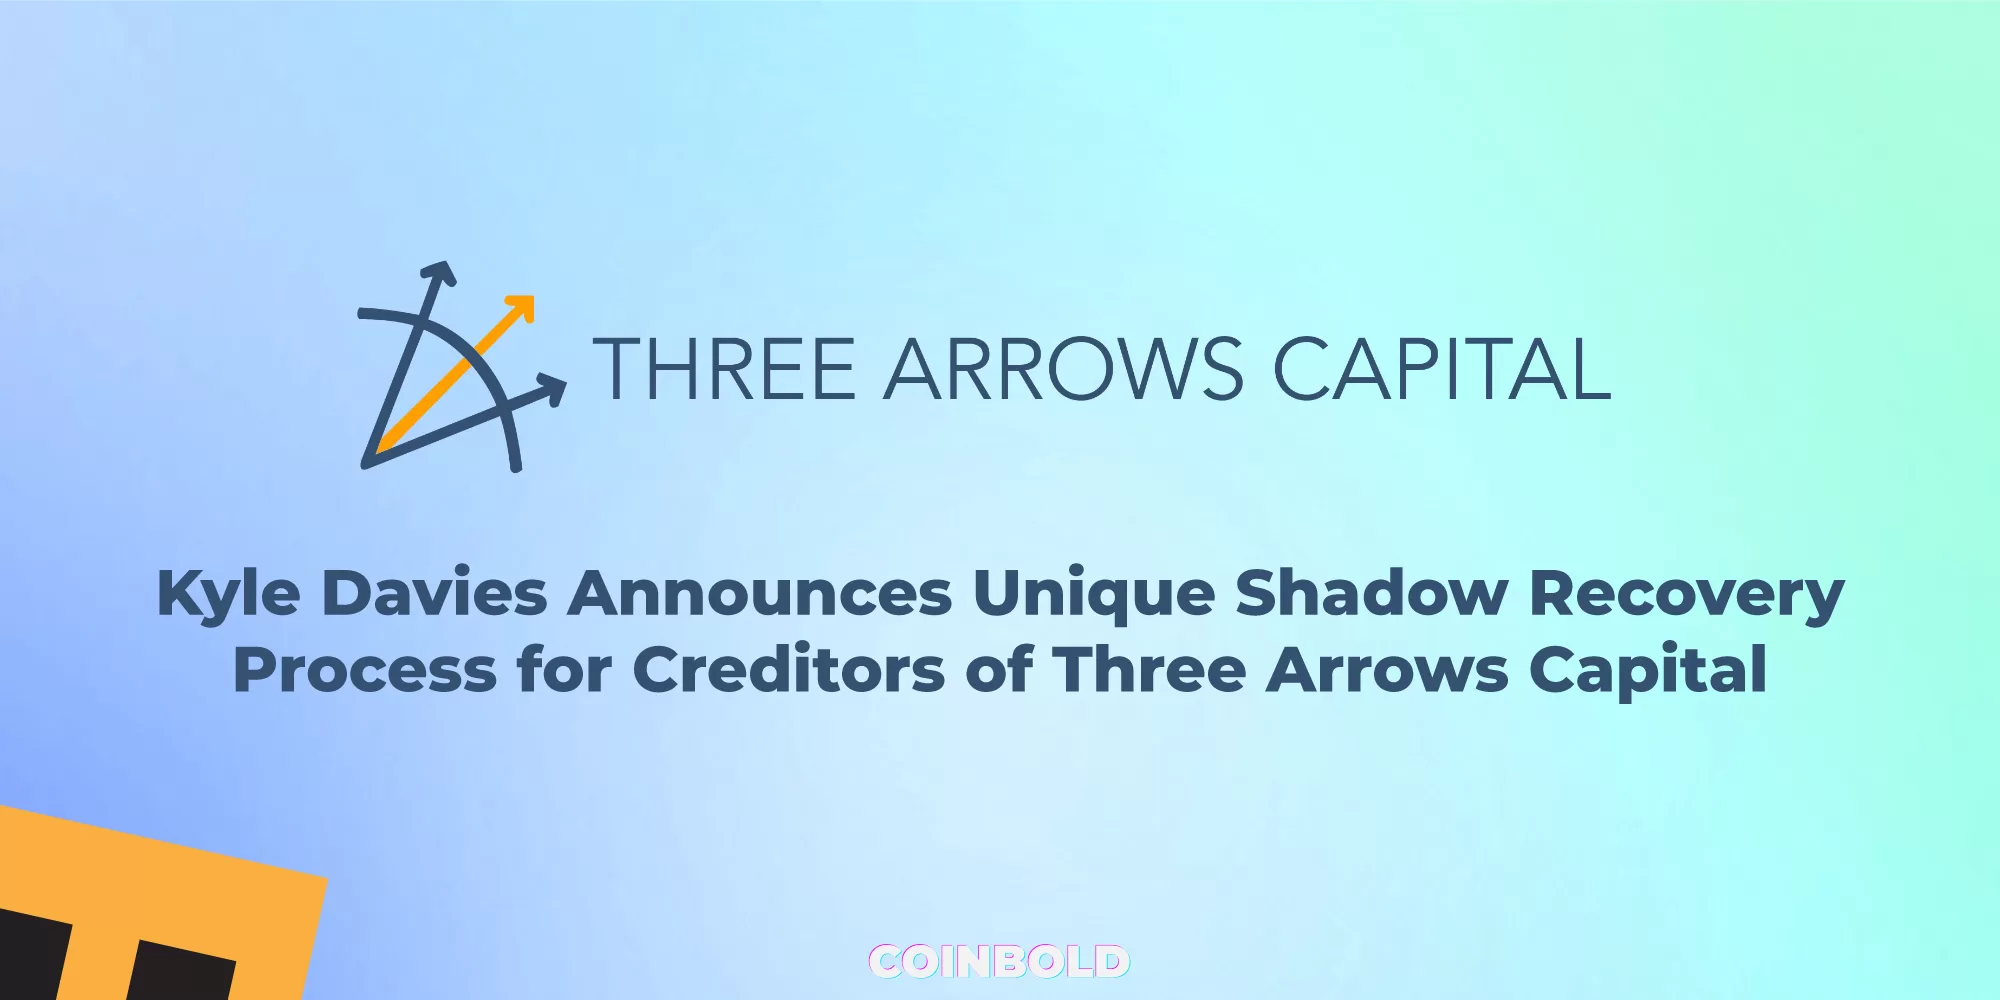 Kyle Davies Announces Unique Shadow Recovery Process for Creditors of Three Arrows Capital